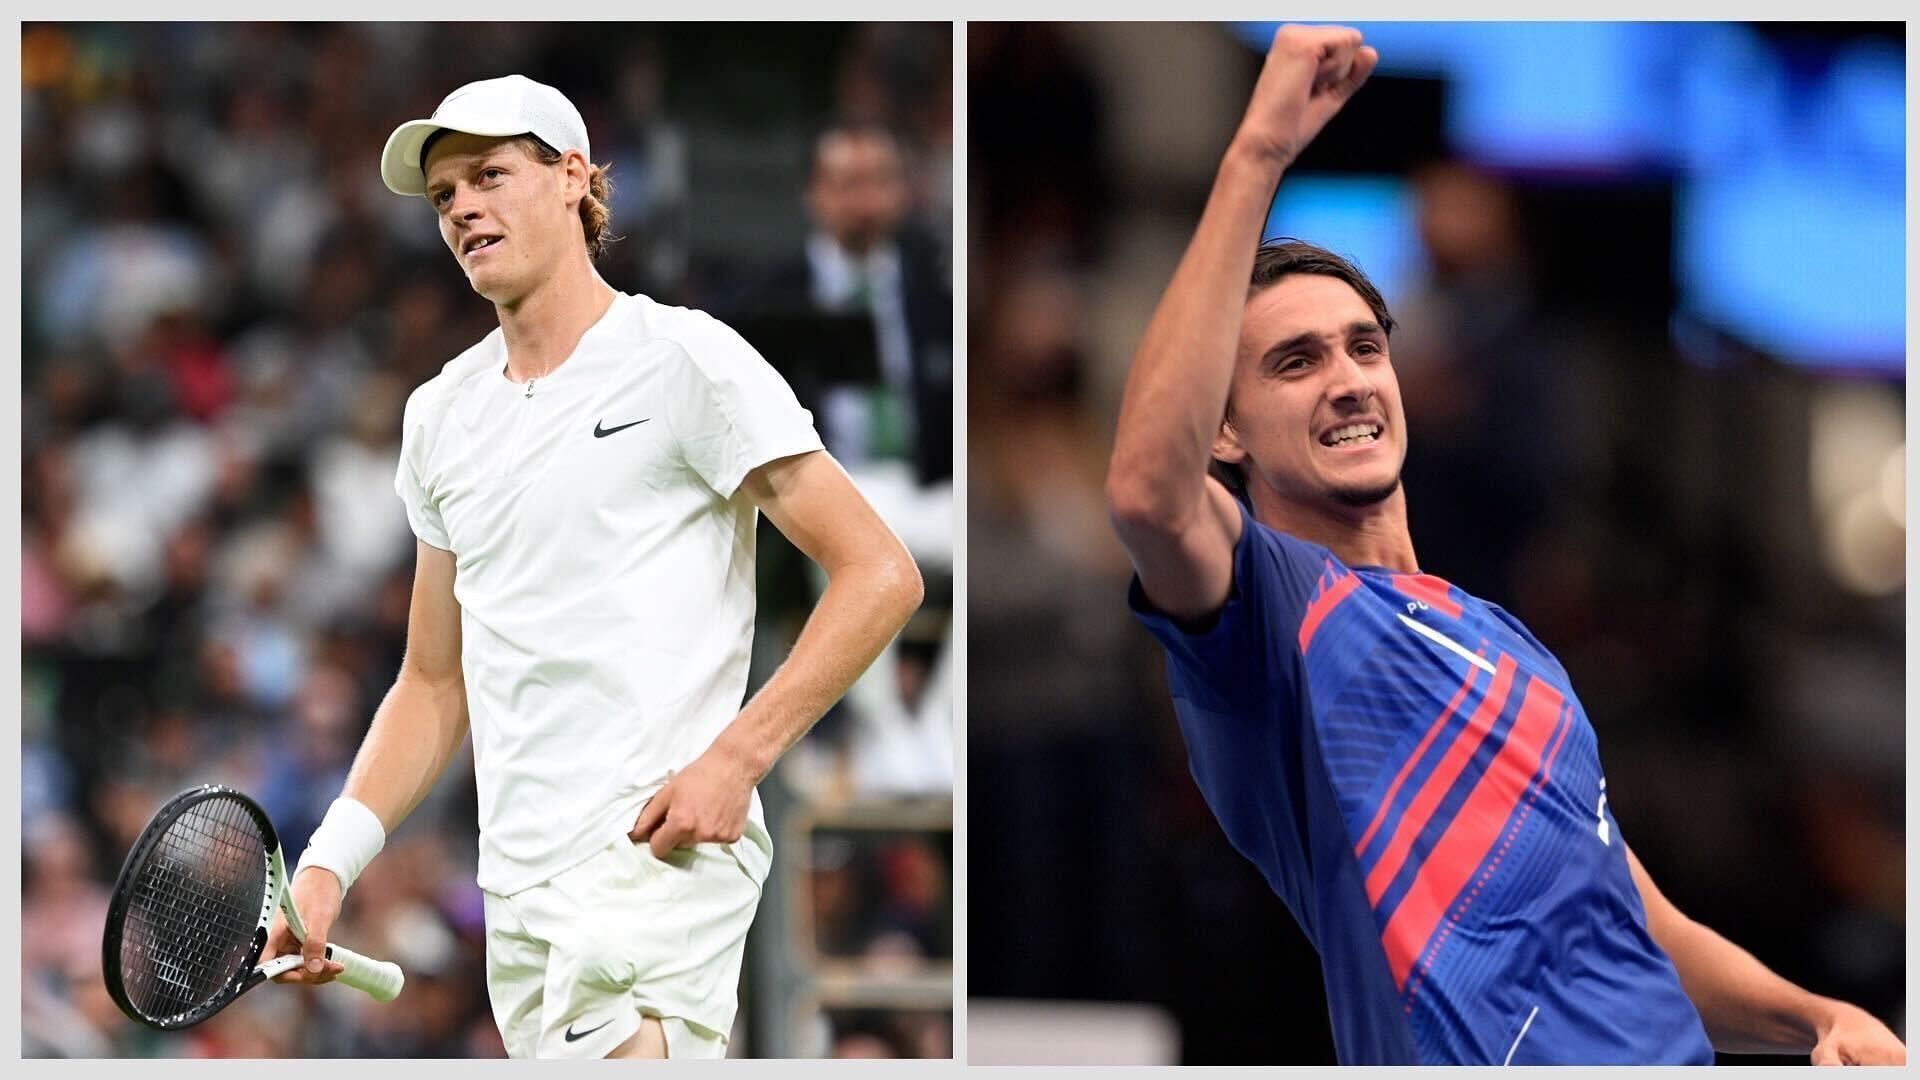 Jannik Sinner vs Lorenzo Sonego is one of the second-round matches at the 2023 US Open.